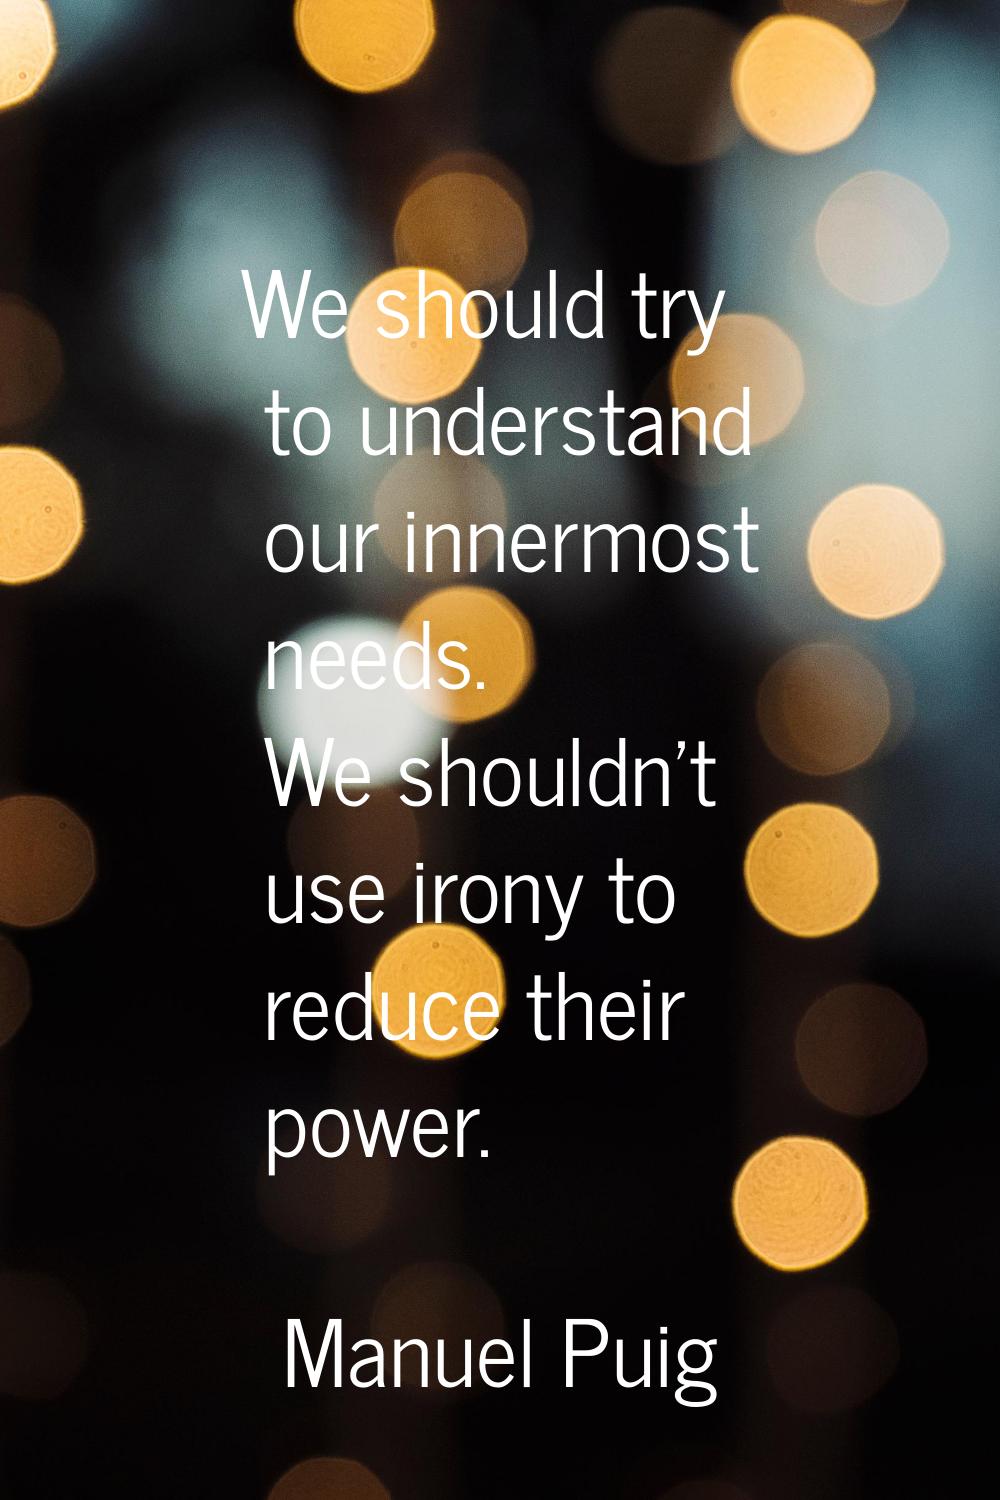 We should try to understand our innermost needs. We shouldn't use irony to reduce their power.